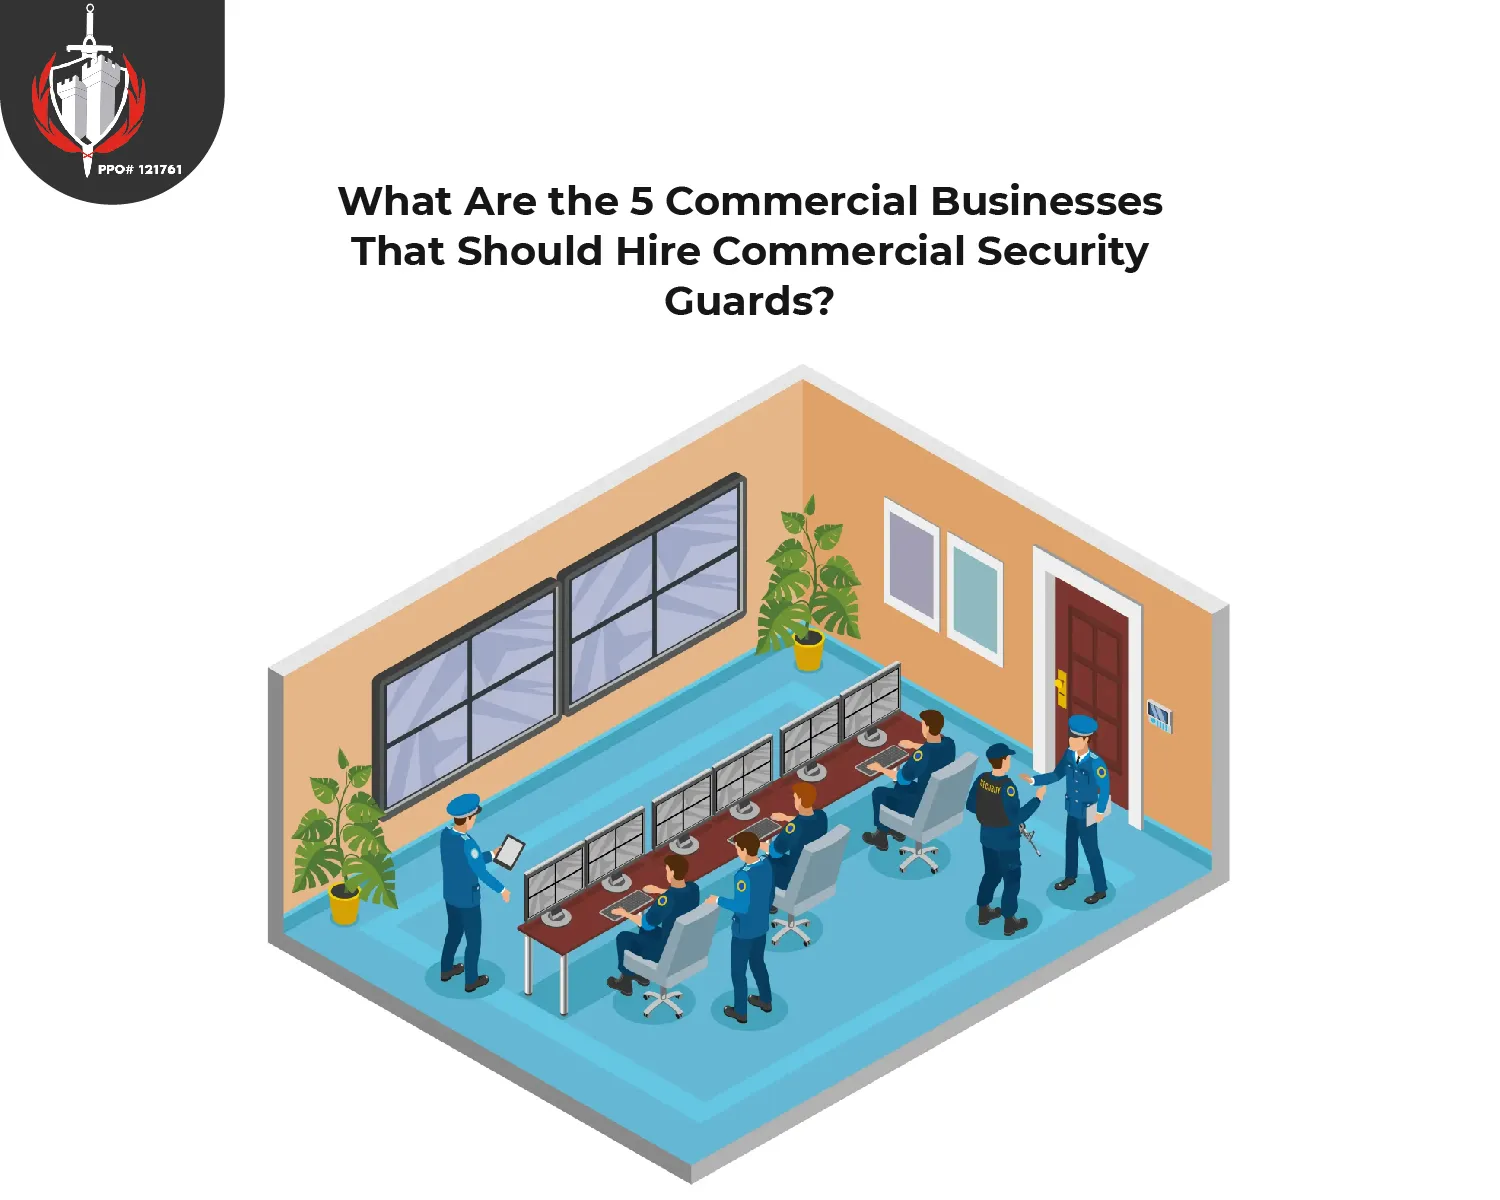 What Are the 5 Commercial Businesses That Should Hire Commercial Security Guards?